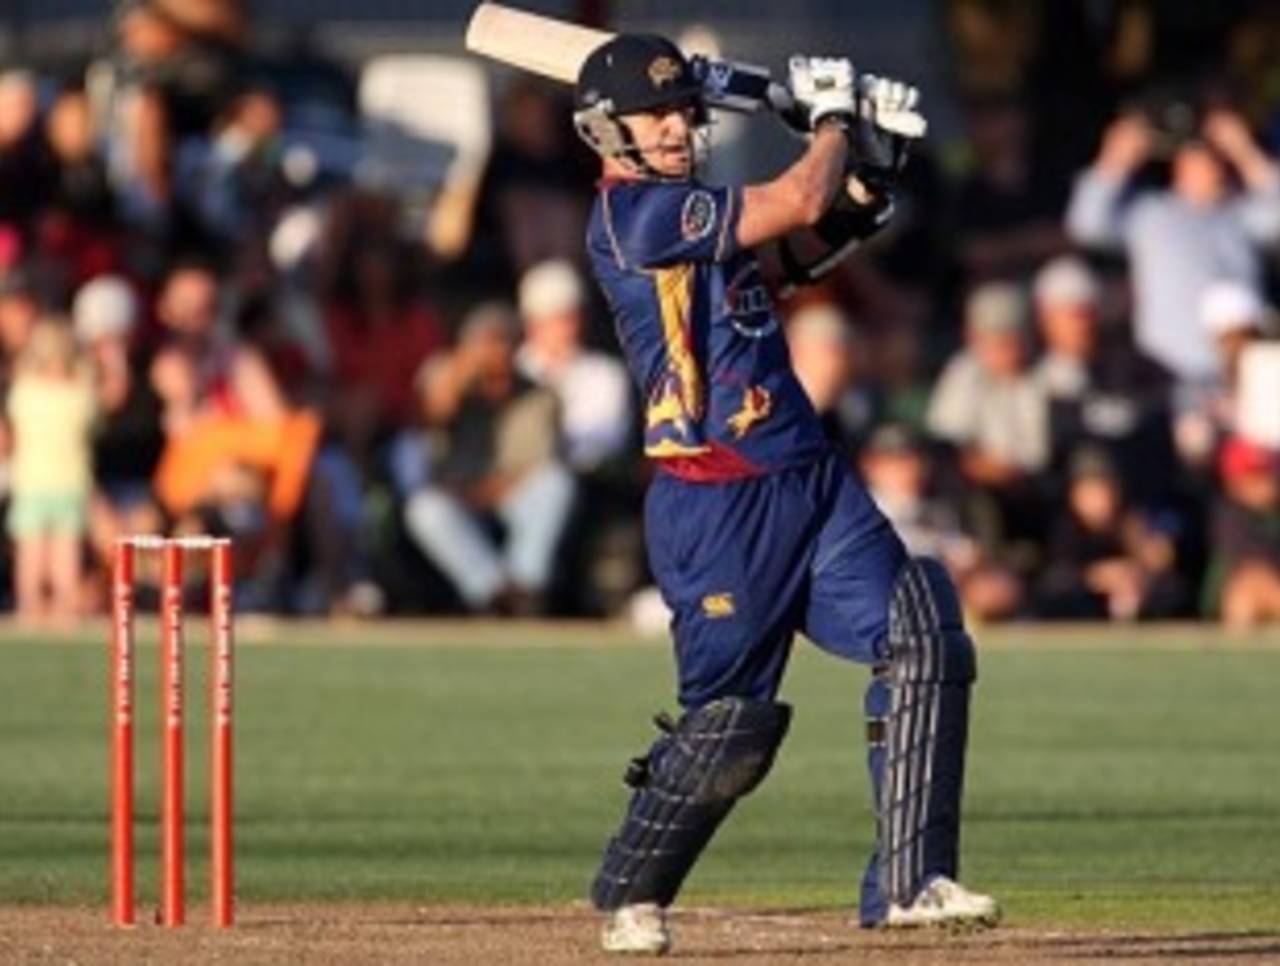 Nathan McCullum scored 61 off 35 balls, Auckland v Otago, HRV Cup, Colin Maiden Park, january 26, 2010 